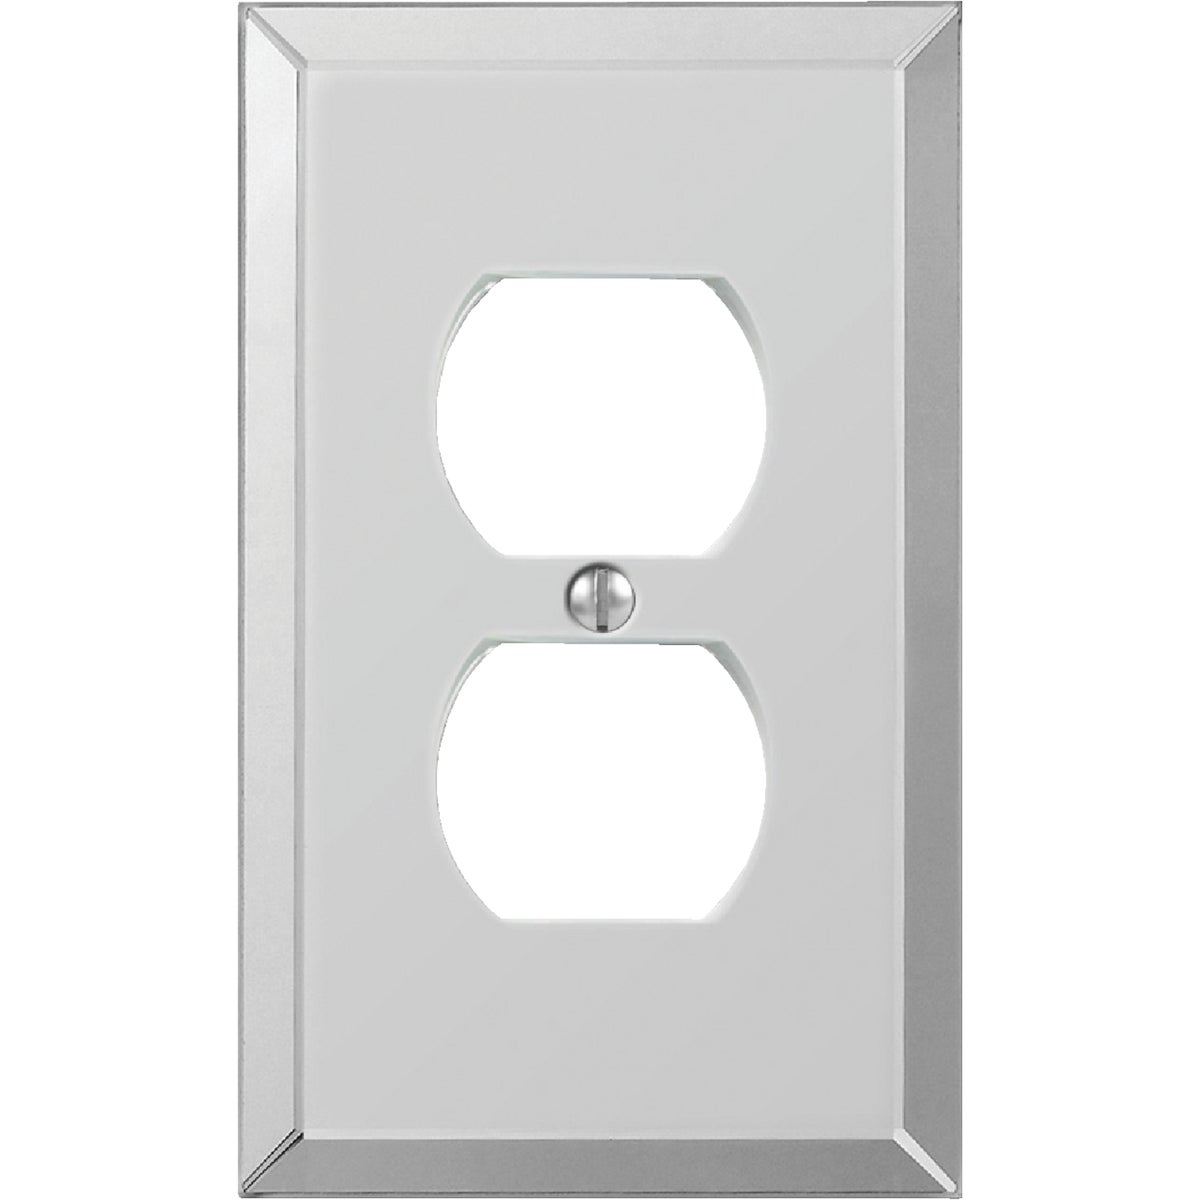 Item 526789, Acrylic beveled mirror duplex outlet wall plate. Durable and stylish.